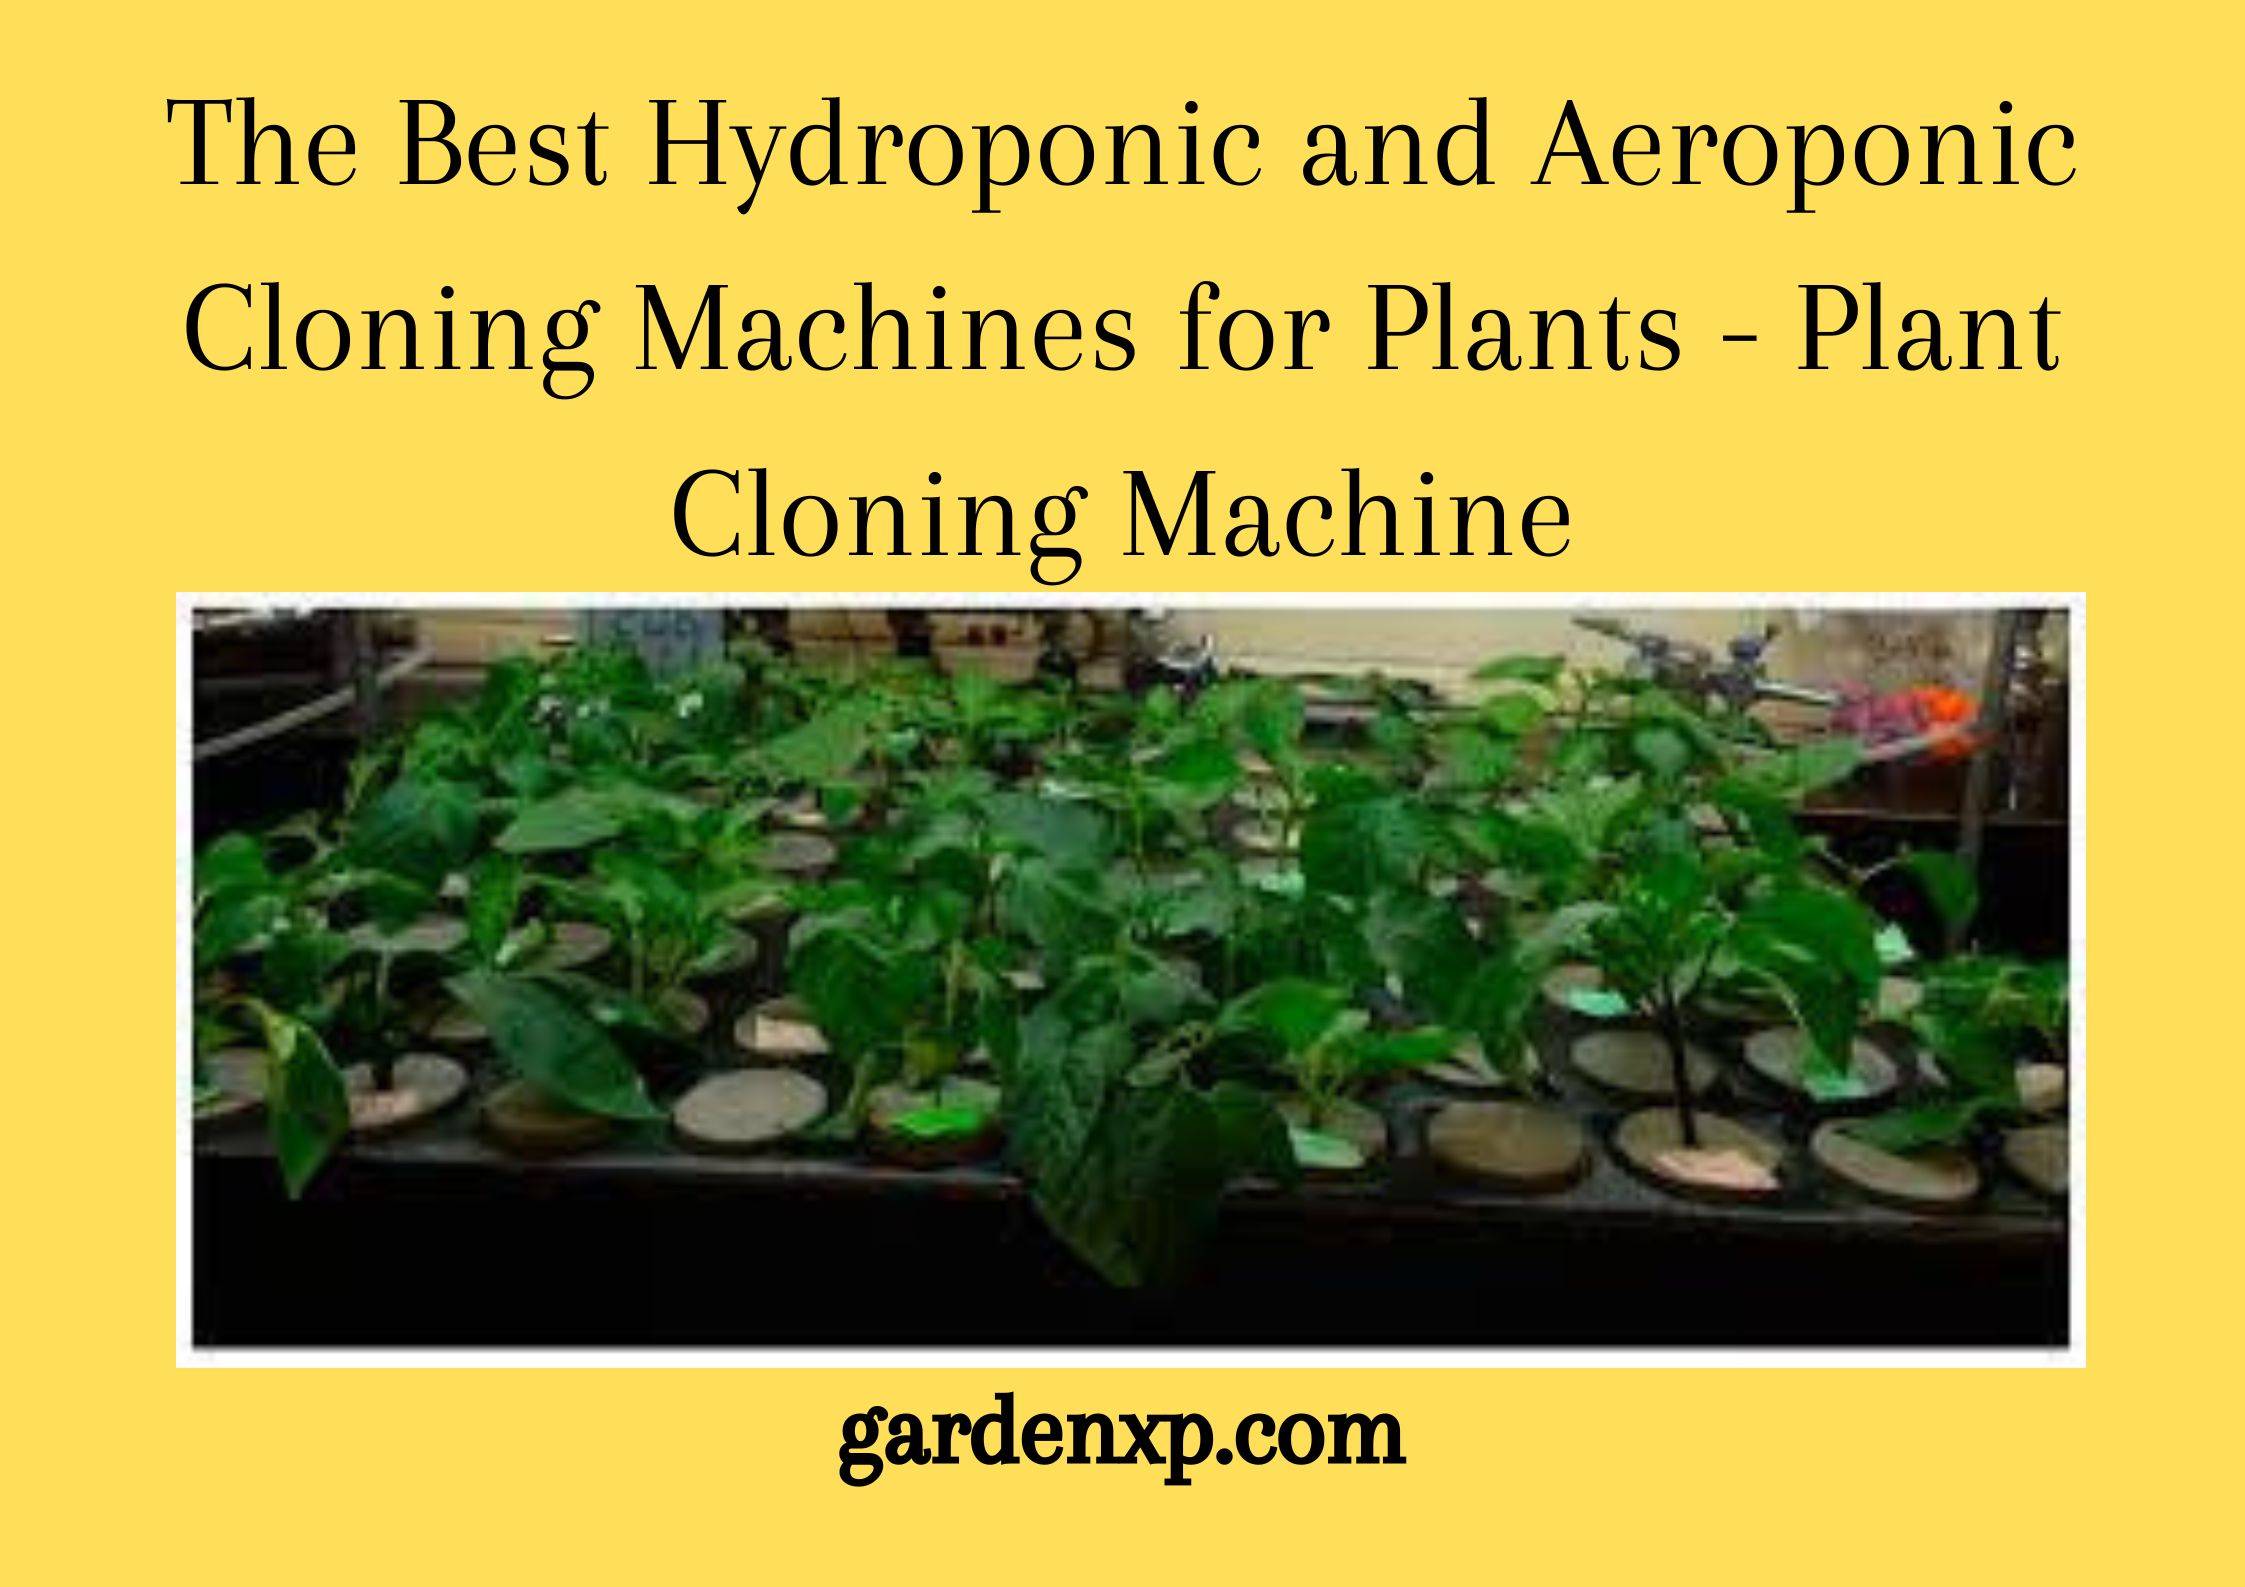 The Best Hydroponic and Aeroponic Cloning Machines for Plants - Plant Cloning Machine